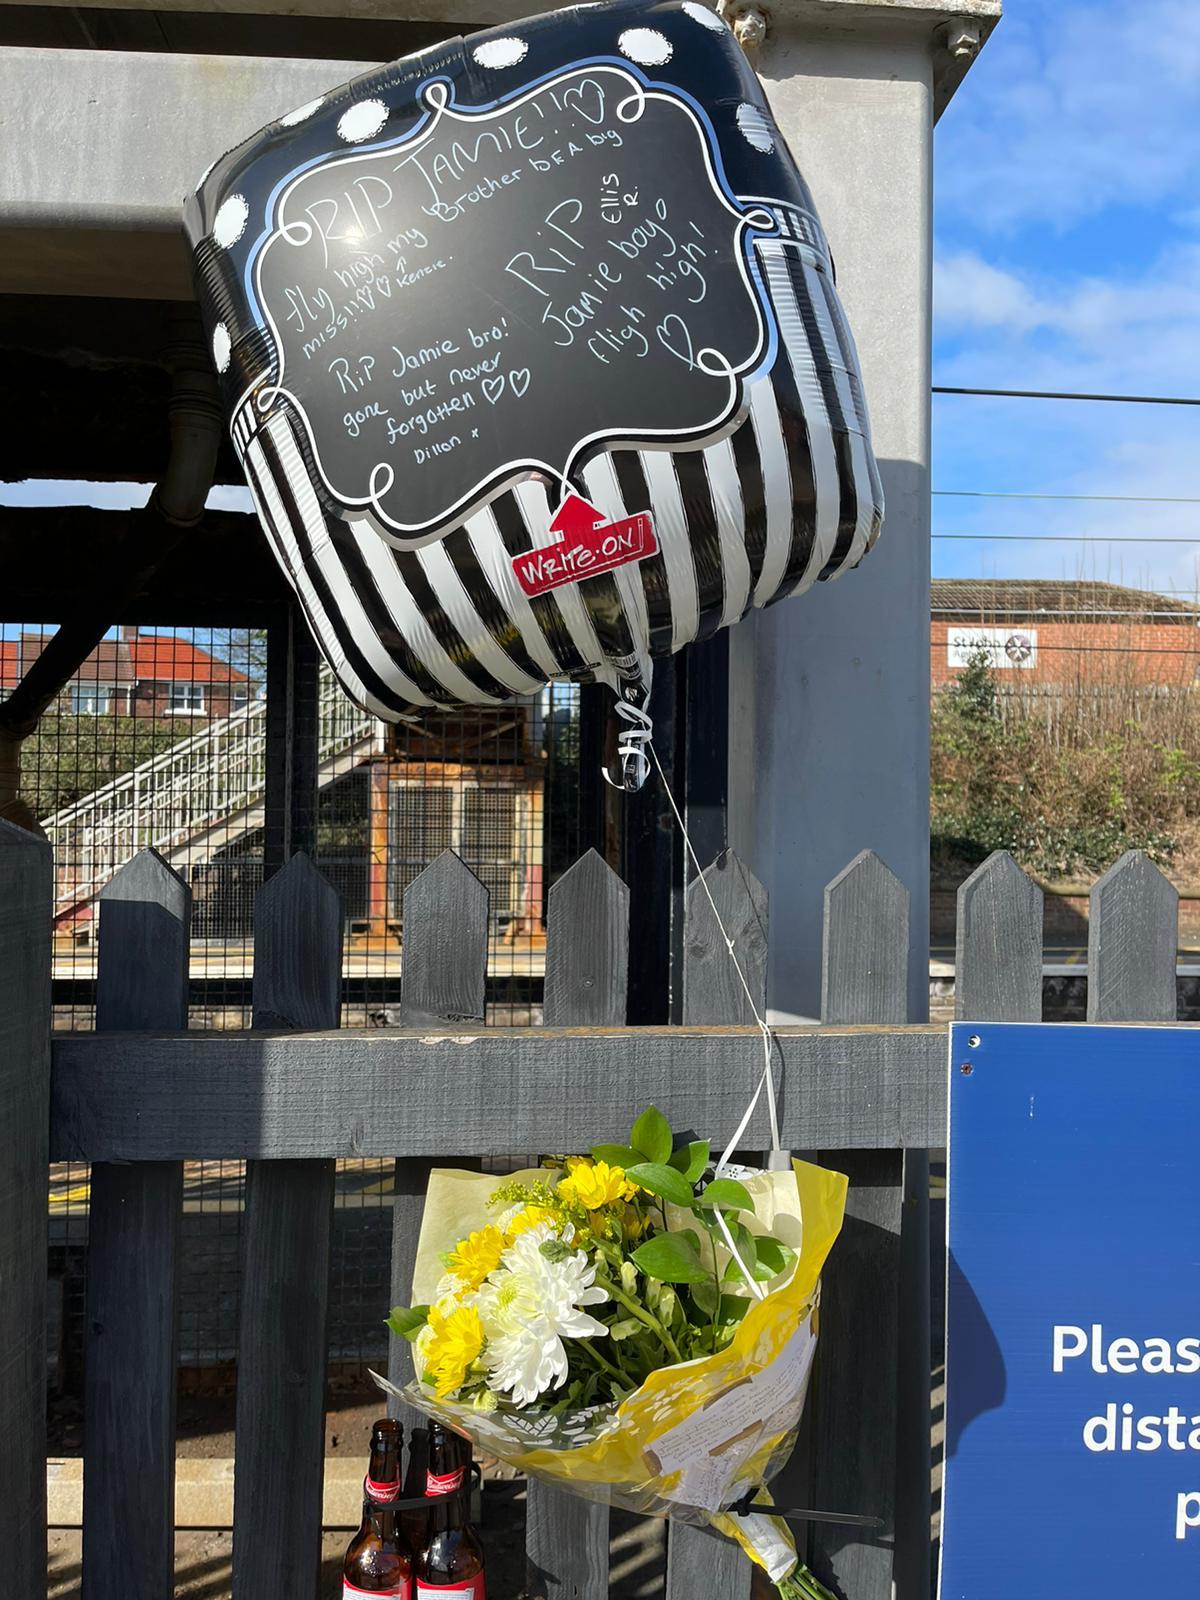 Tributes have been left at Chester-le-Street station 